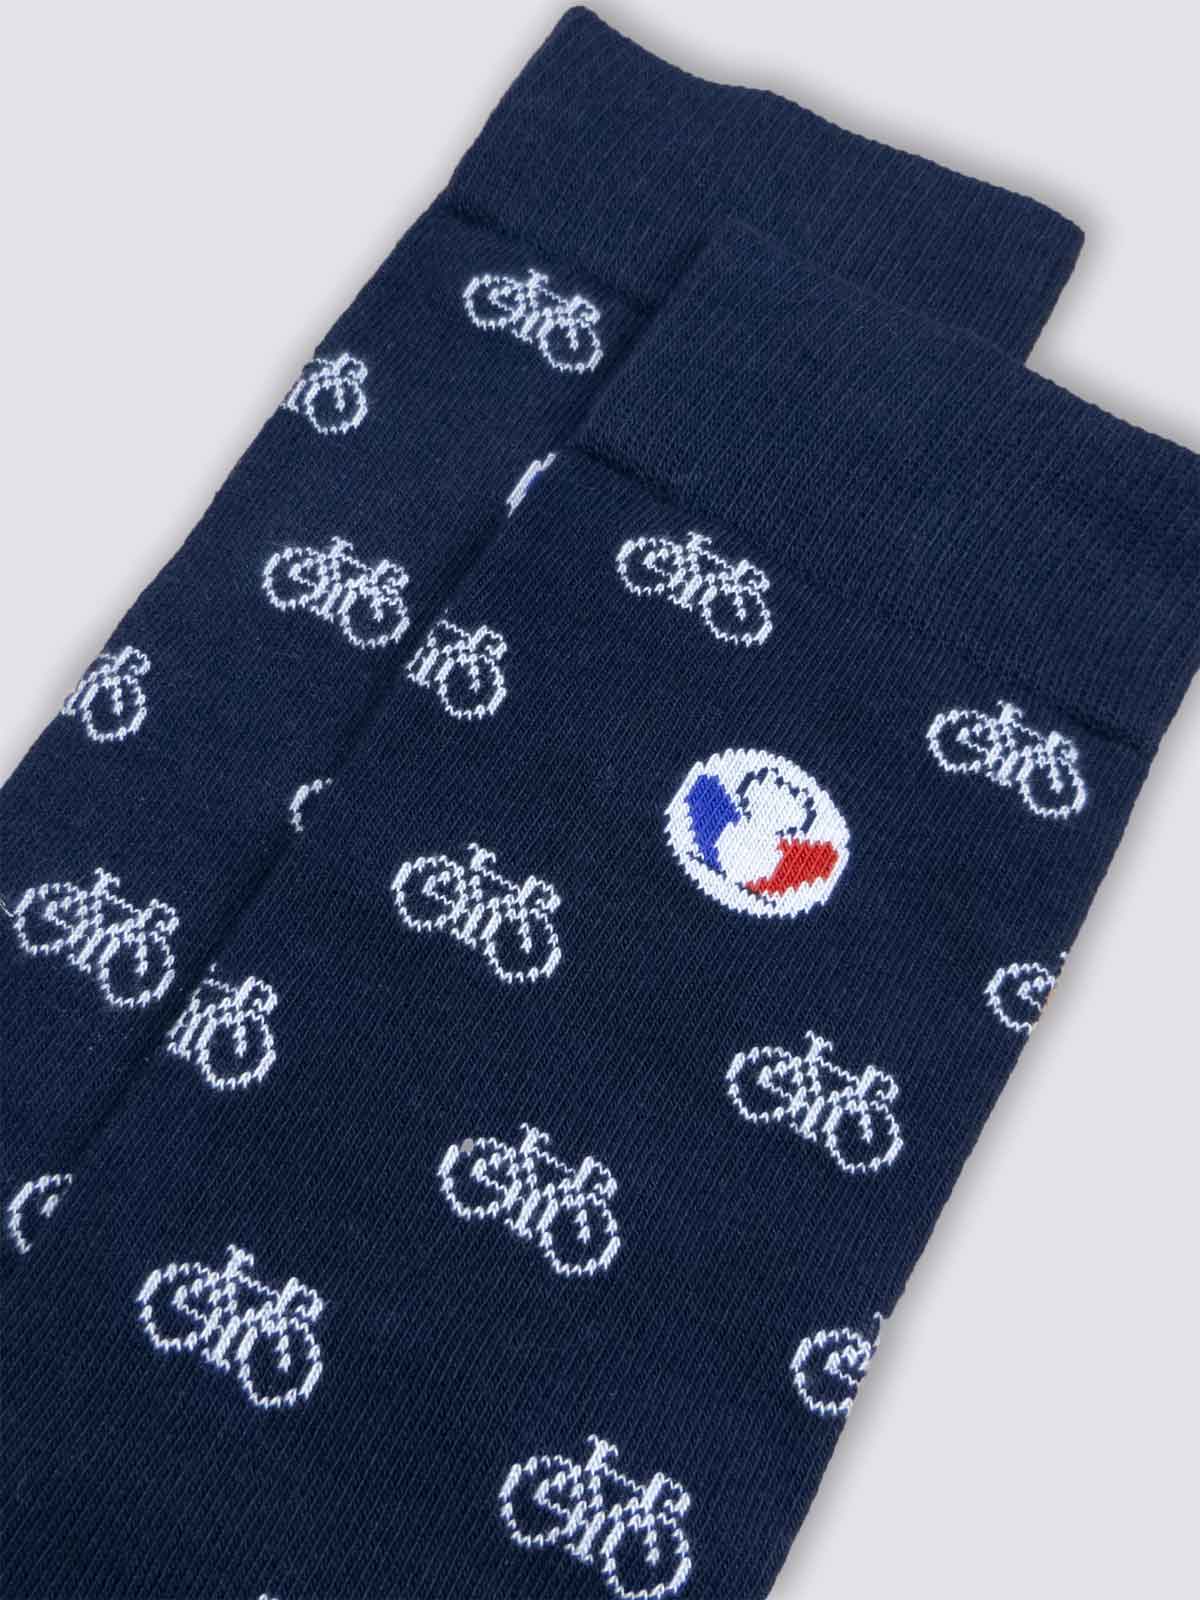 chaussettes-made-in-france-les-velos-bleu-marine-2